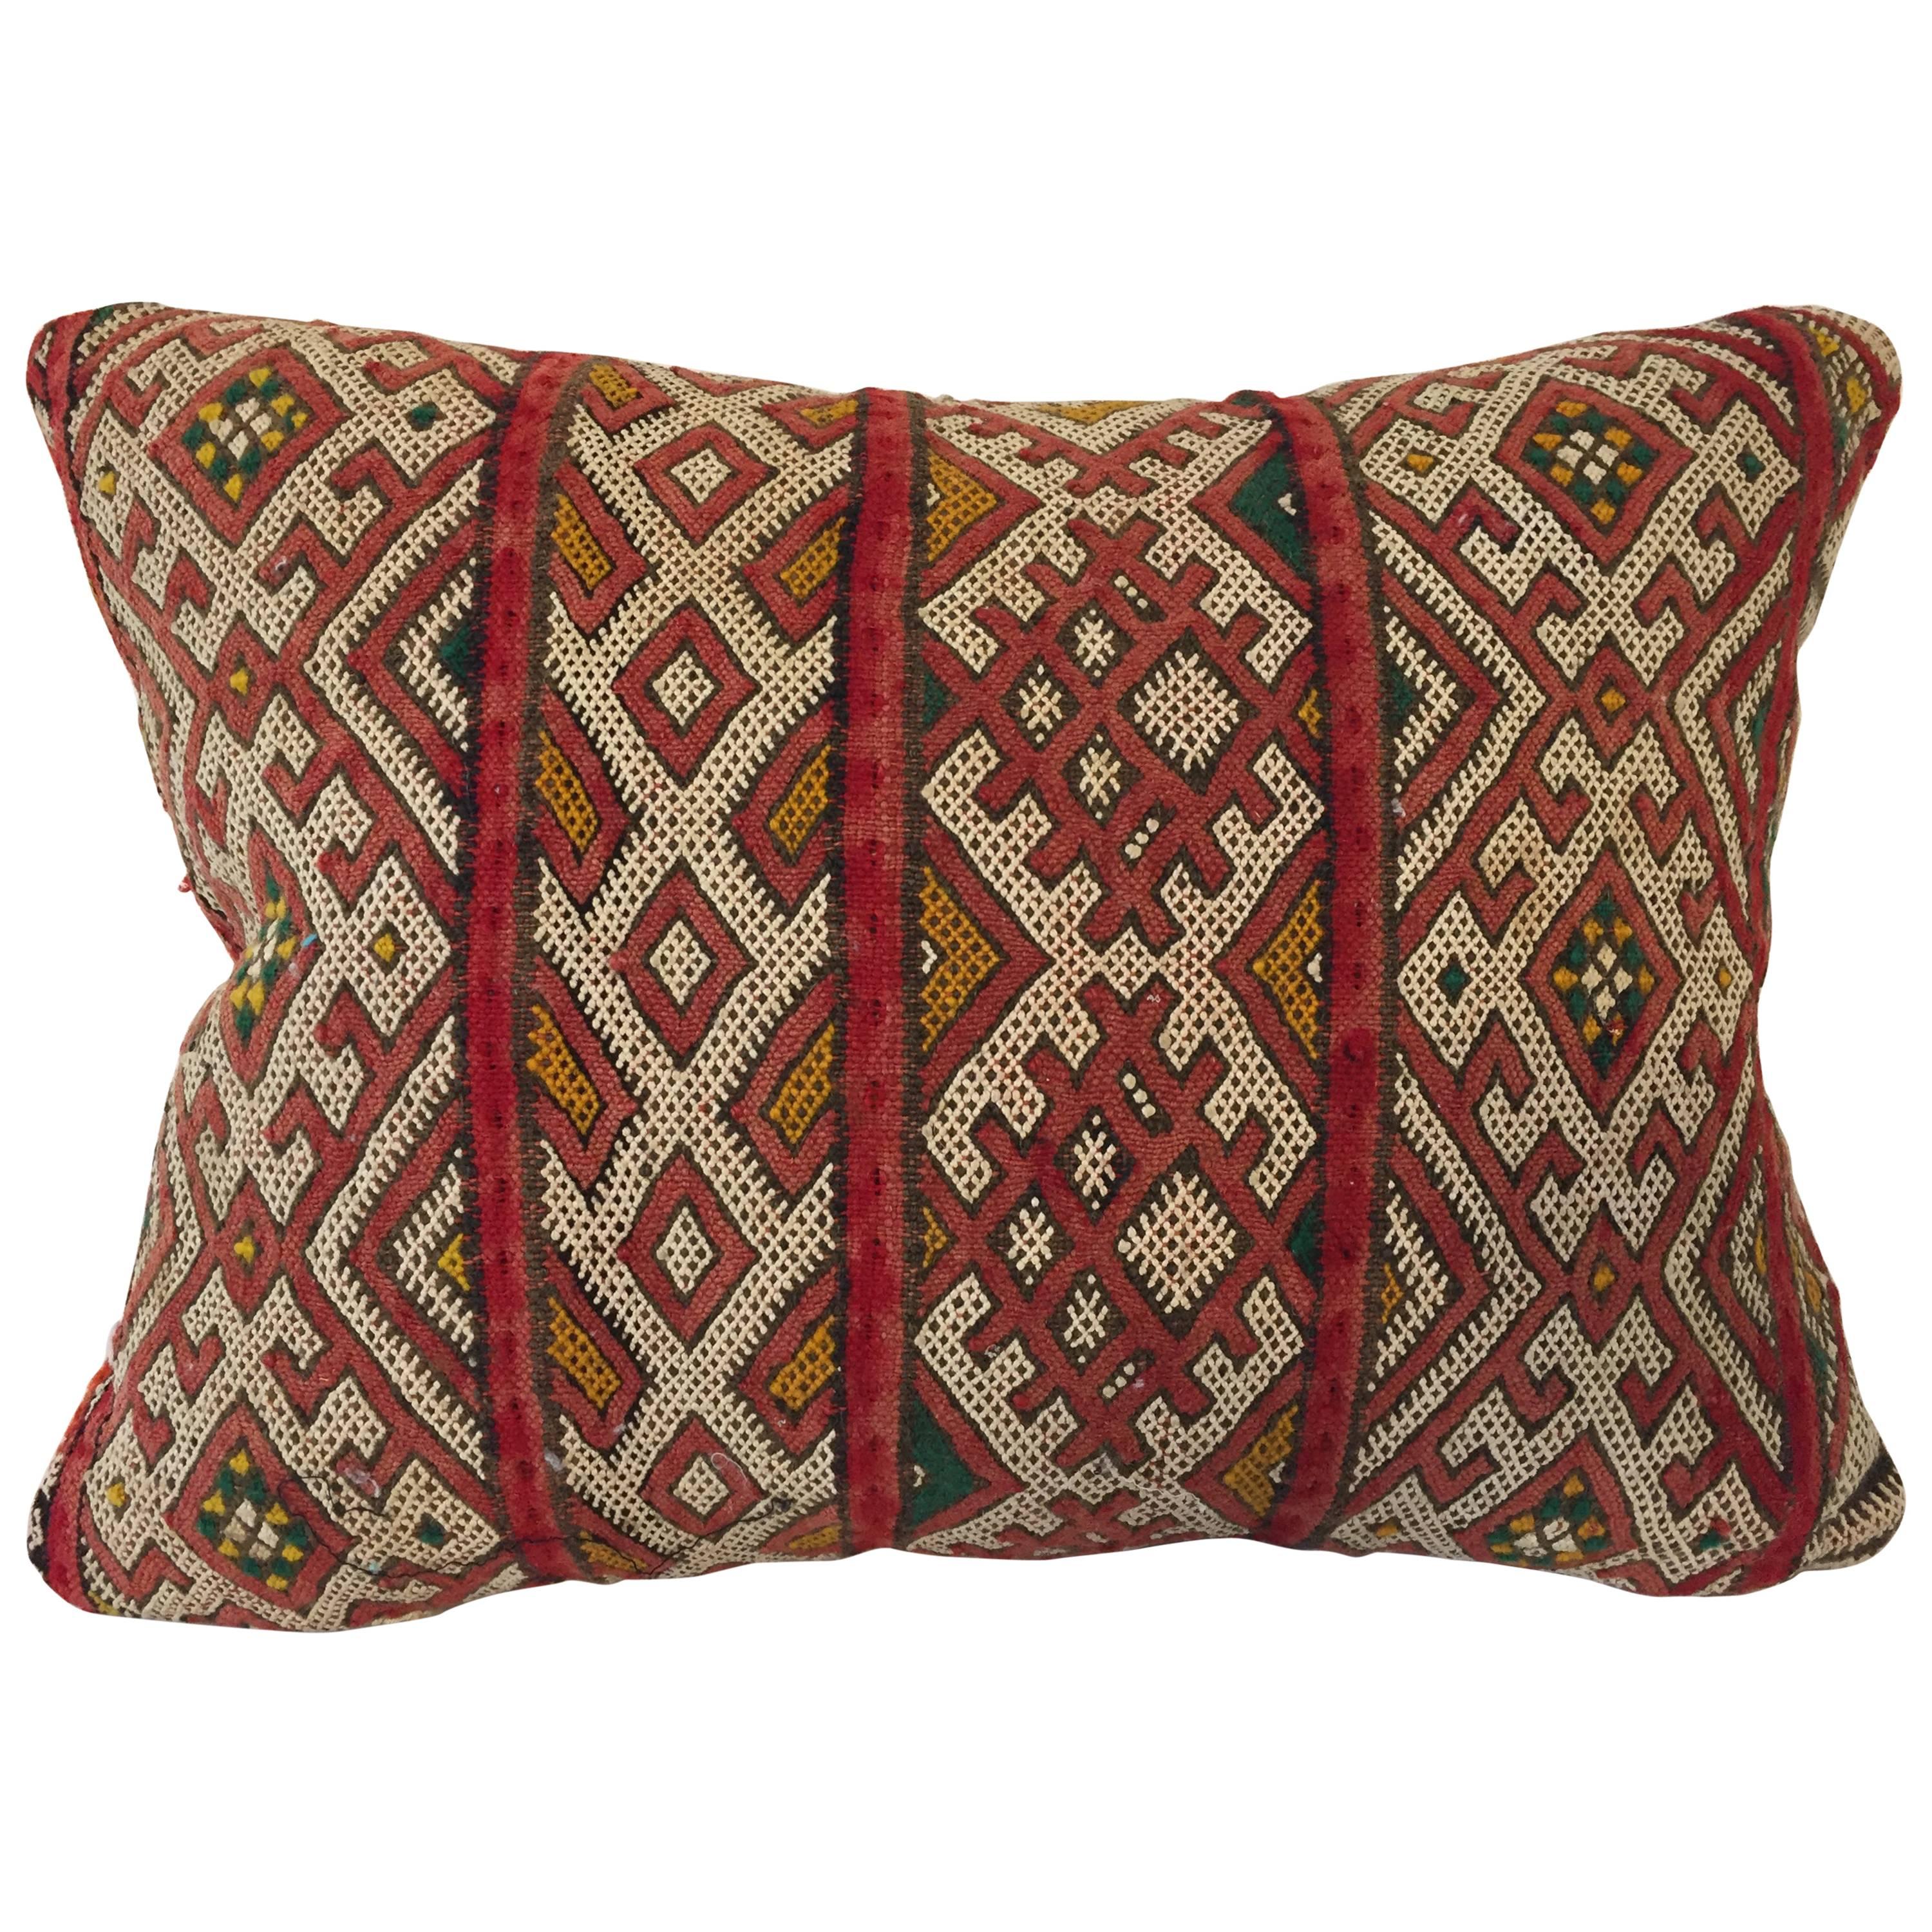 Moroccan Red Berber Tribal Pillow with African Designs